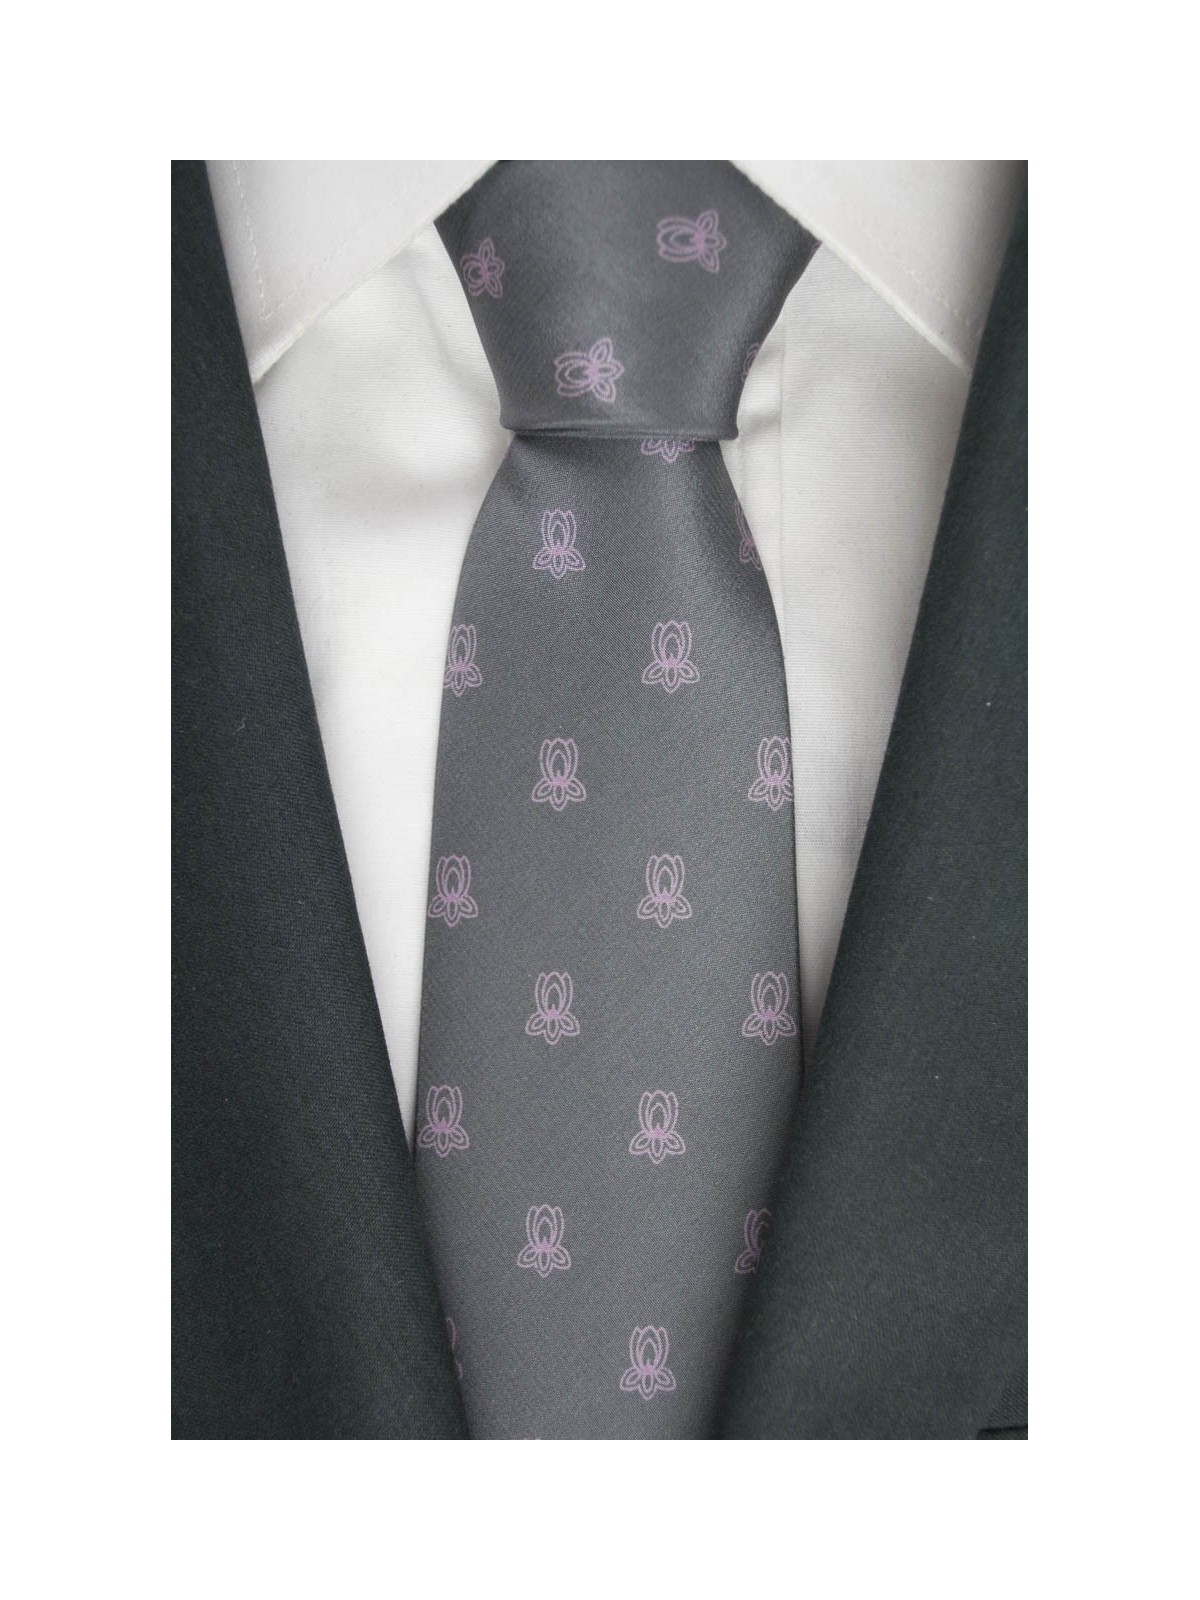 Tie Gray Small Pink graphics - 100% Pure Silk - Made in Italy